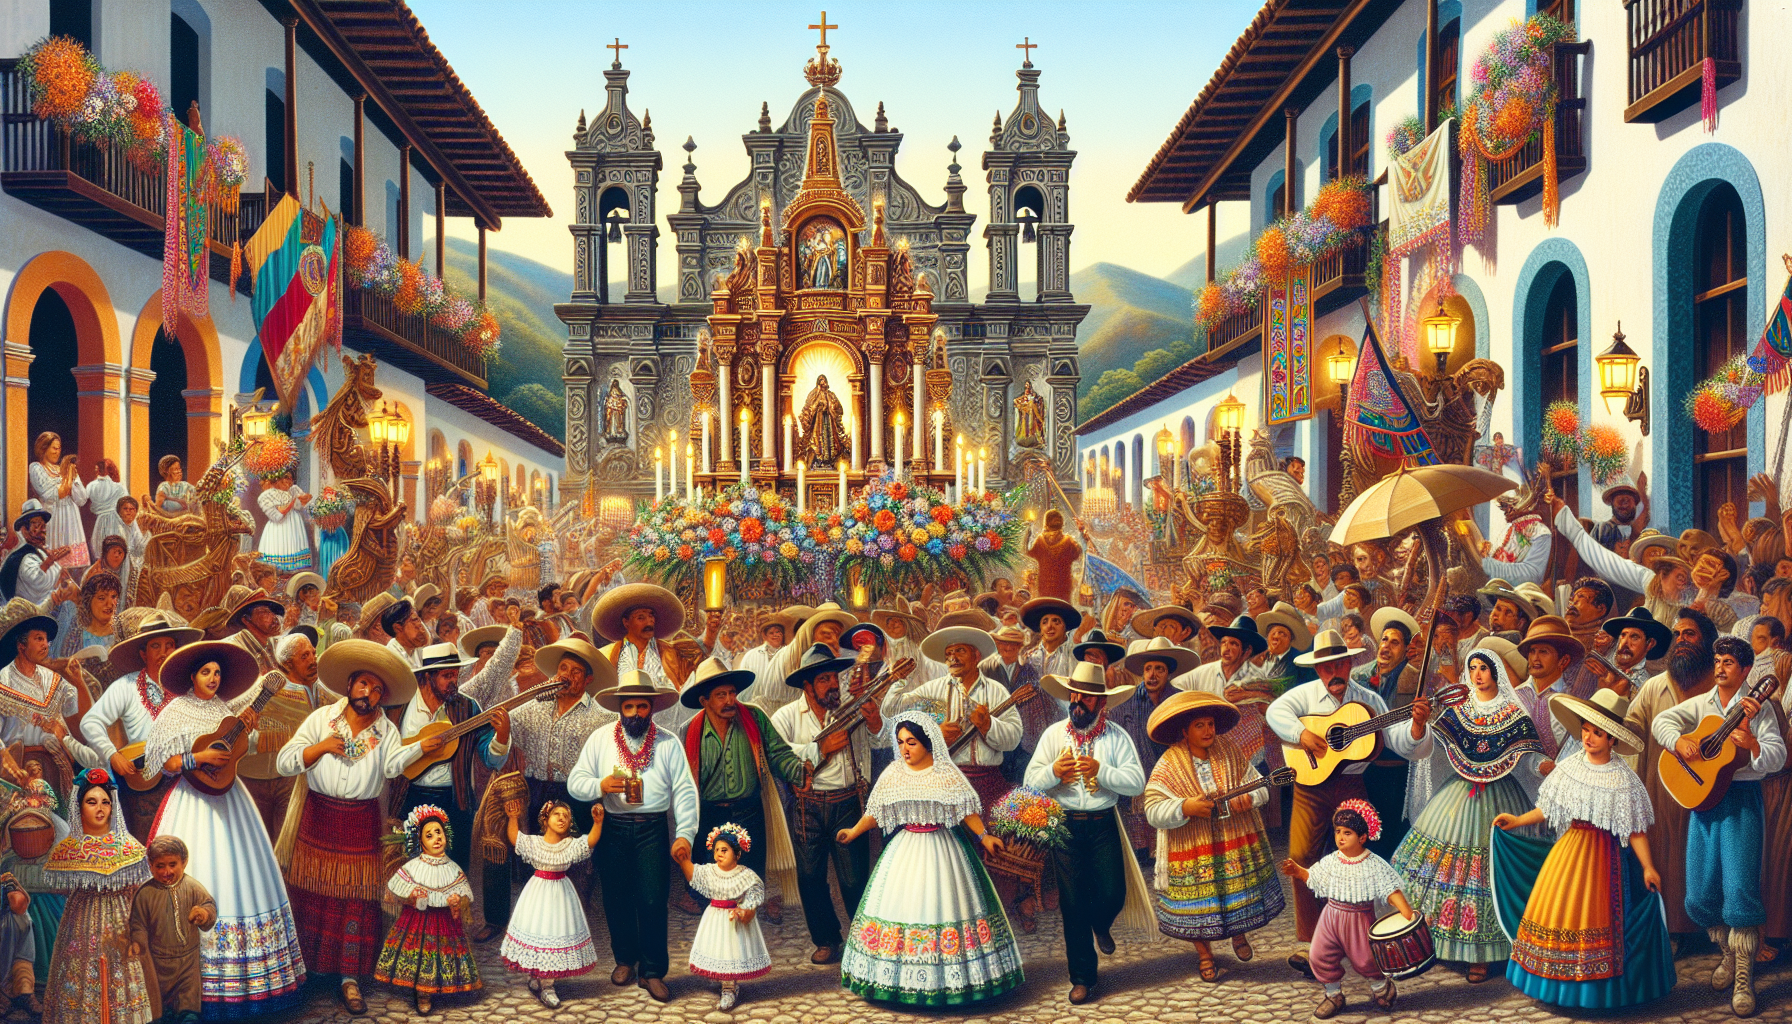 Create an image of the Fiesta del Sagrado Corazón that captures vibrant cultural traditions and deep spiritual devotion. Show a lively street scene in a Latin American village with people wearing trad